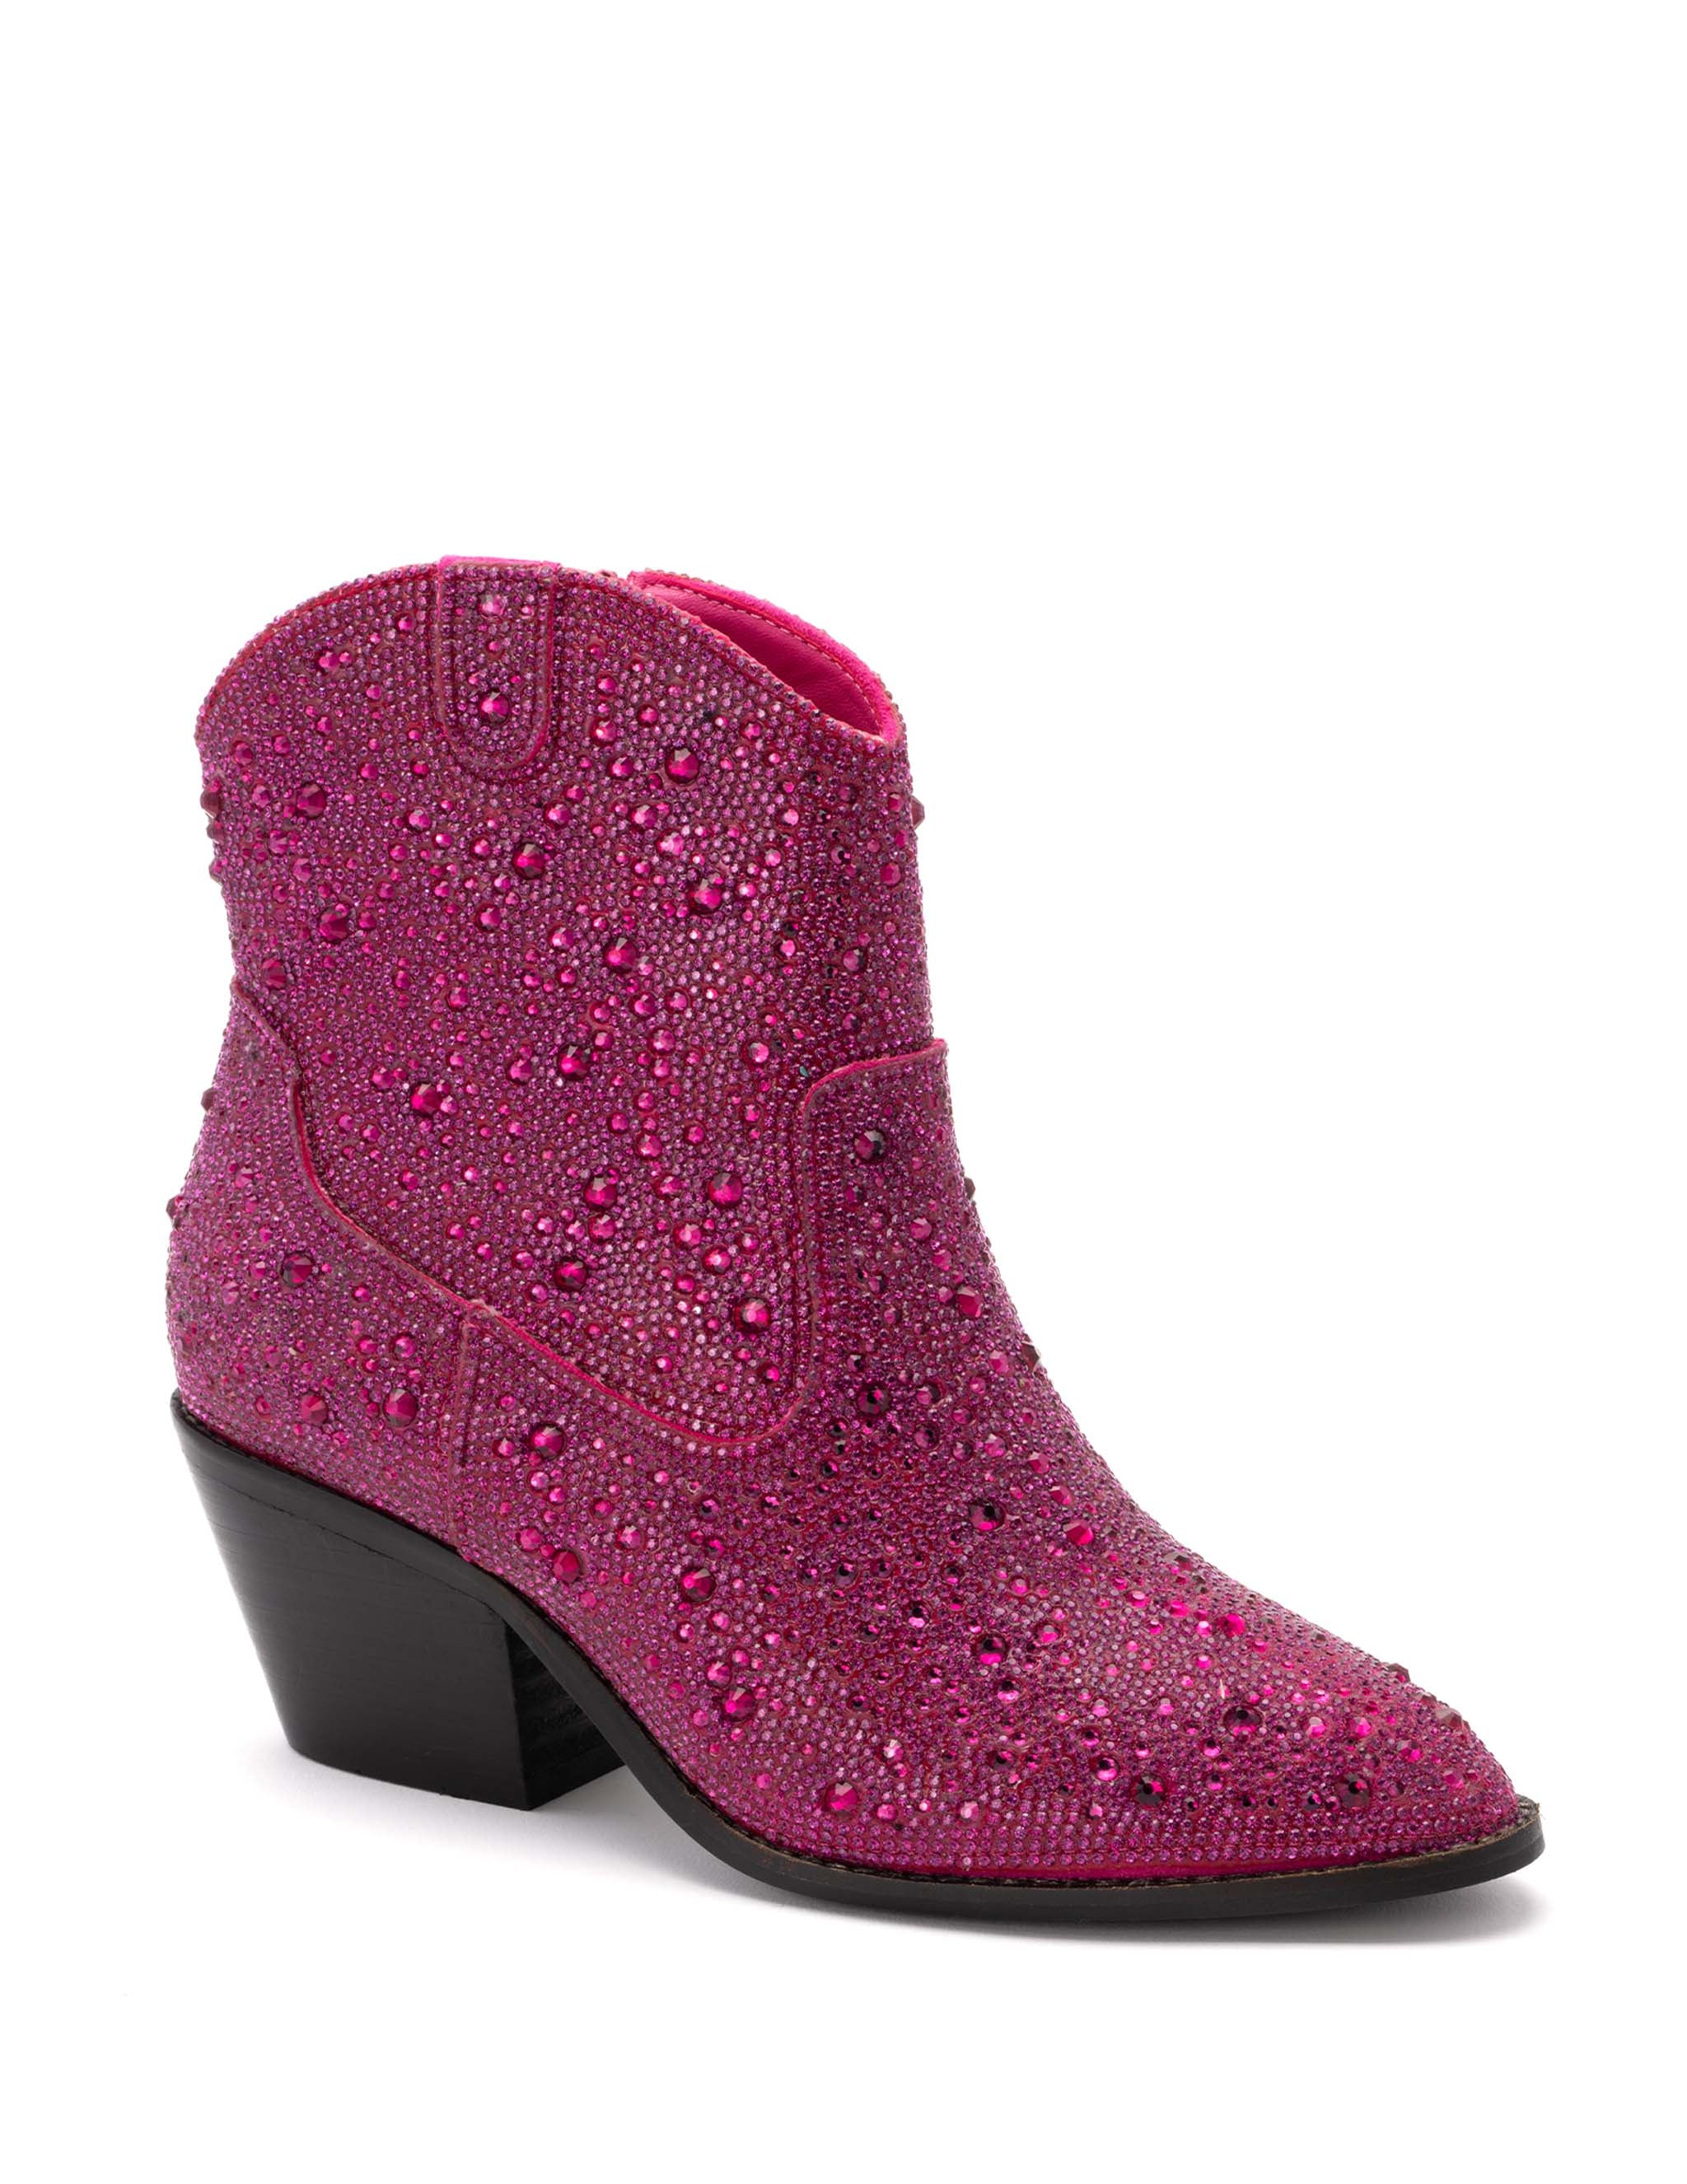 Shine Bright Glitter Ankle Boot by Corkys